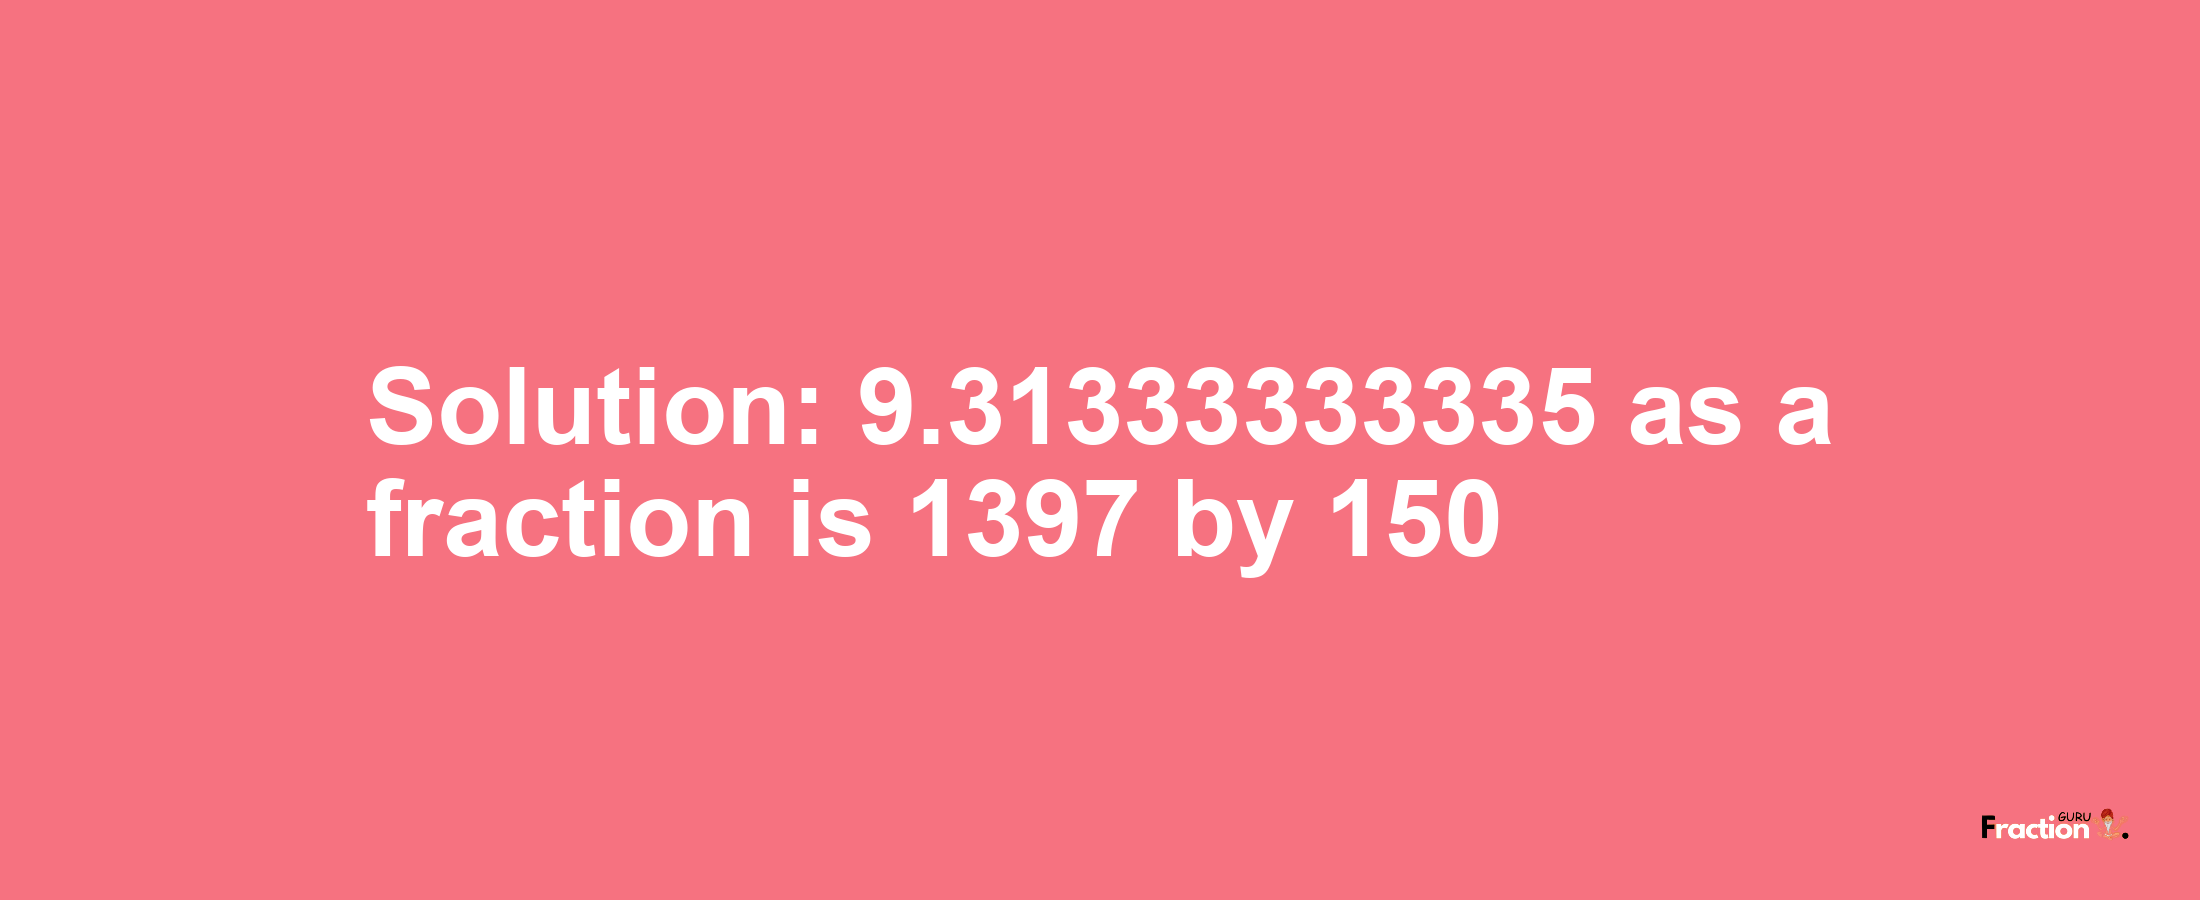 Solution:9.31333333335 as a fraction is 1397/150